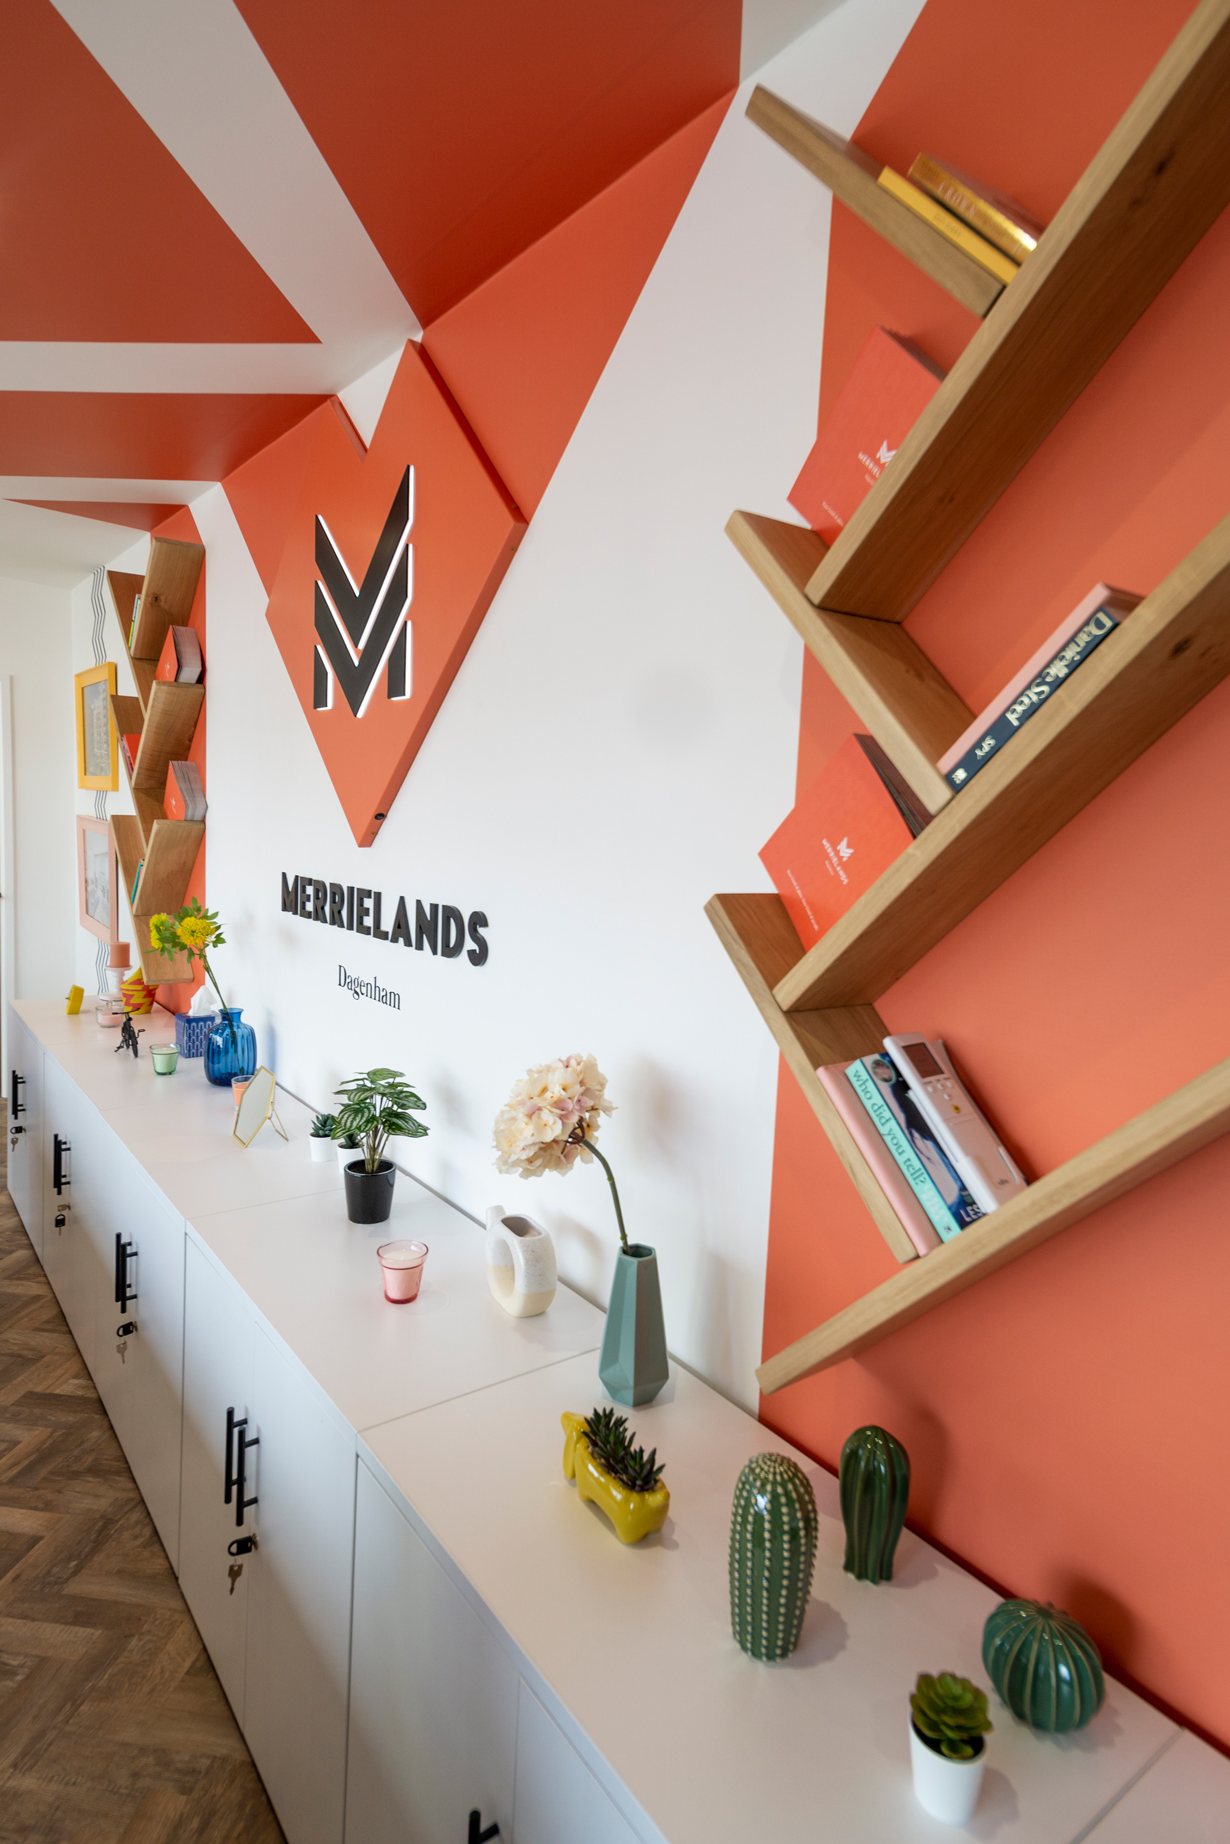 Merrielands logo on a wall with wooden shelves either side of it